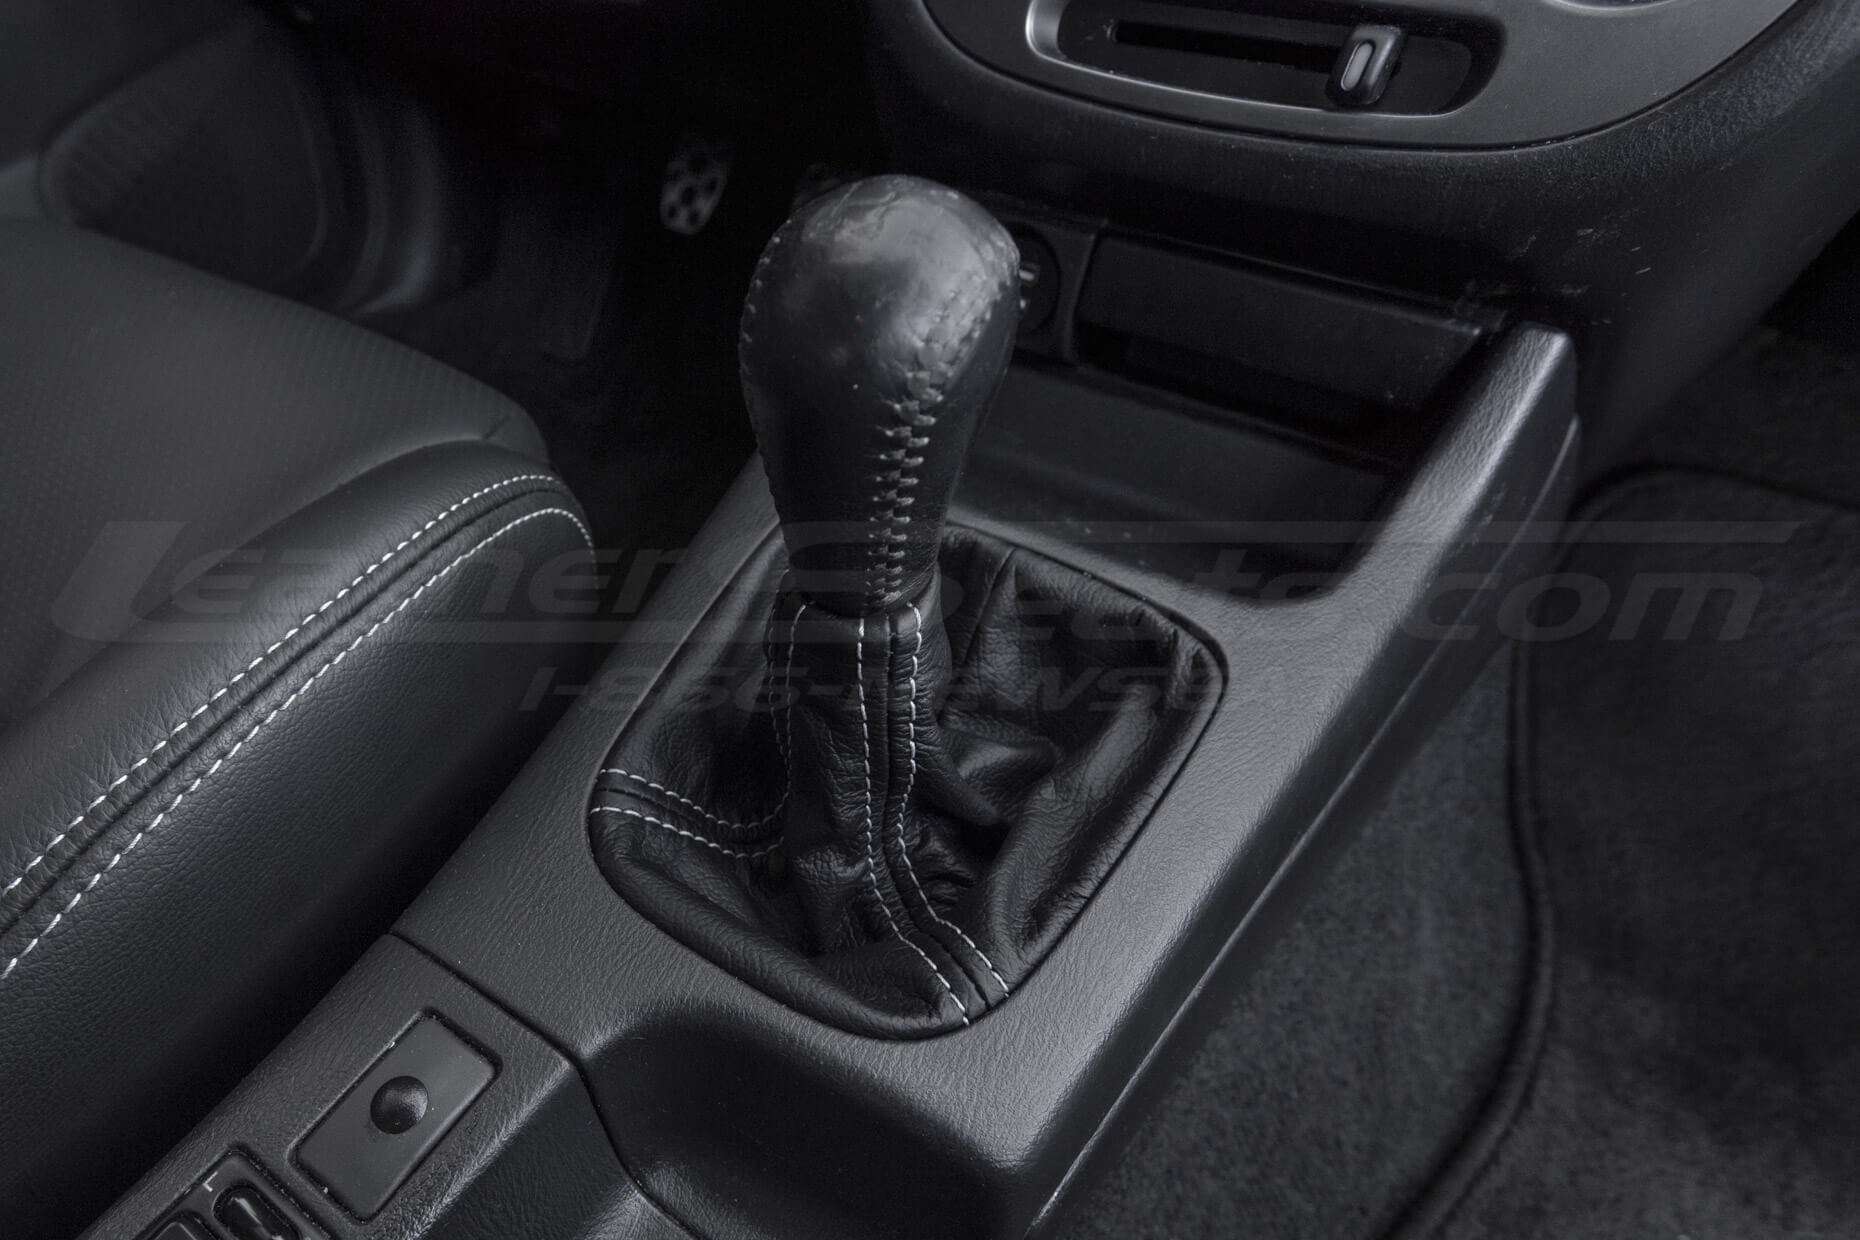 Black leather shift boot with contrasting double-stitching